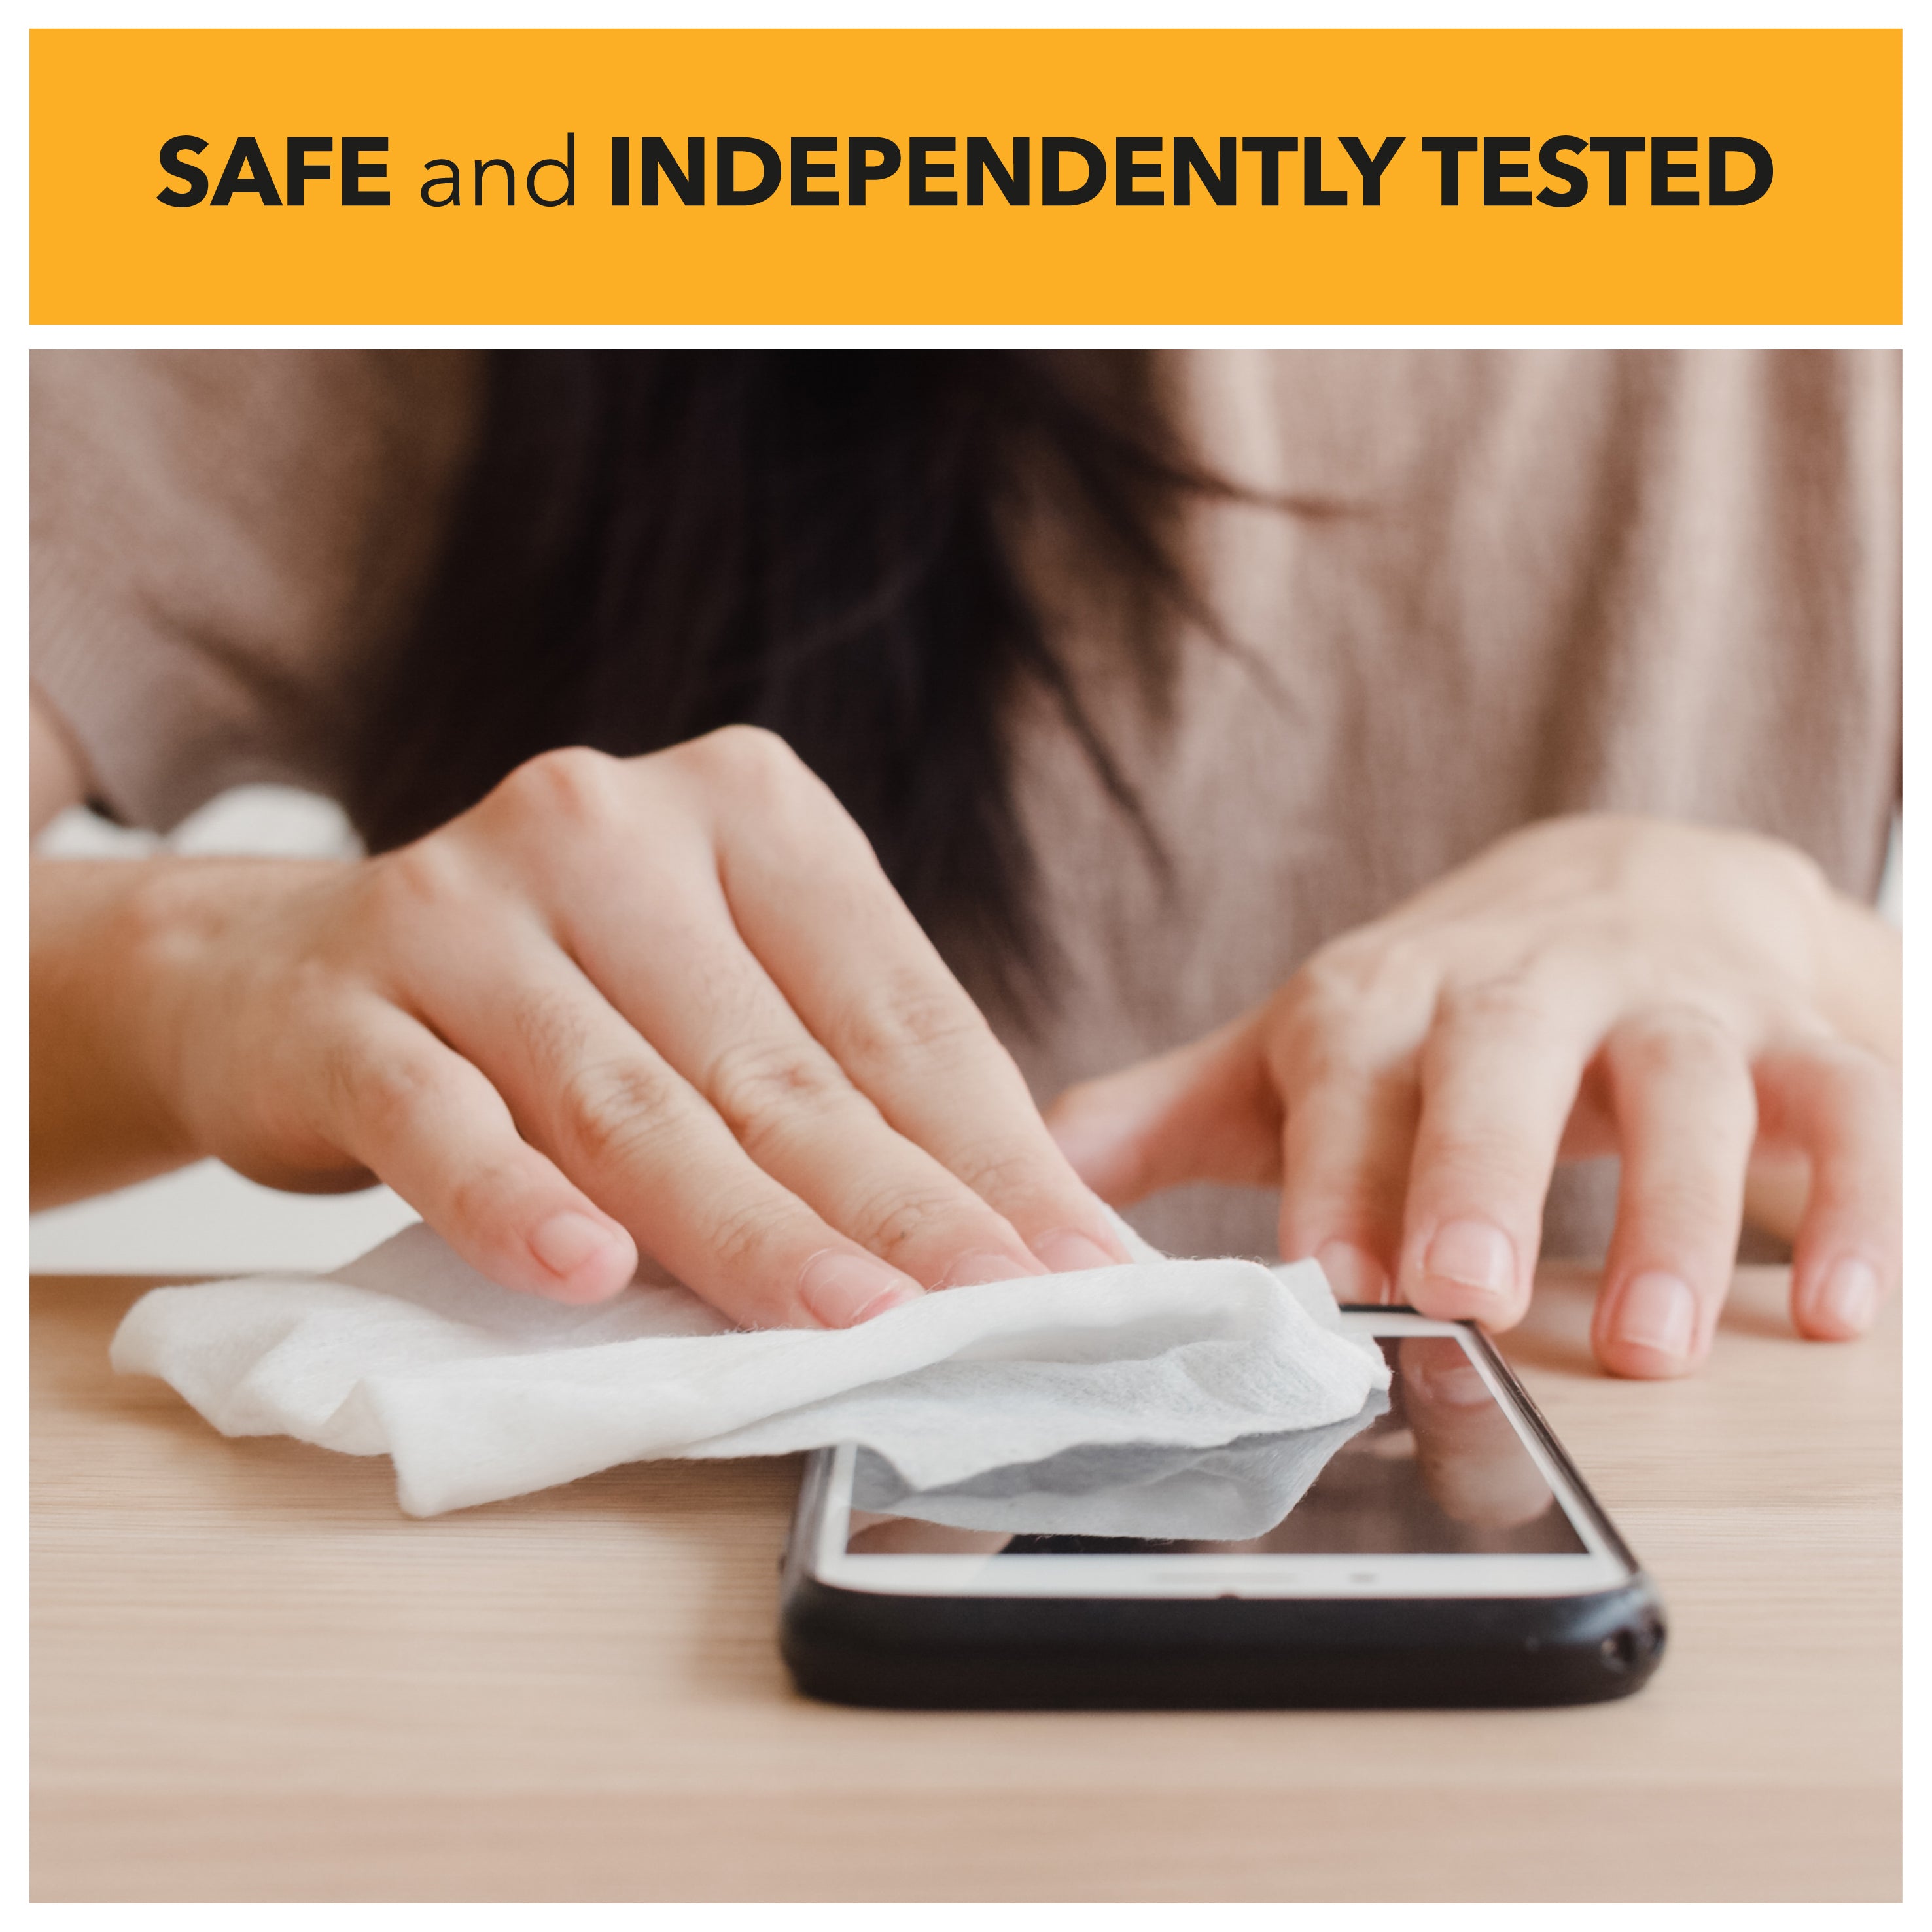 safe and independently tested